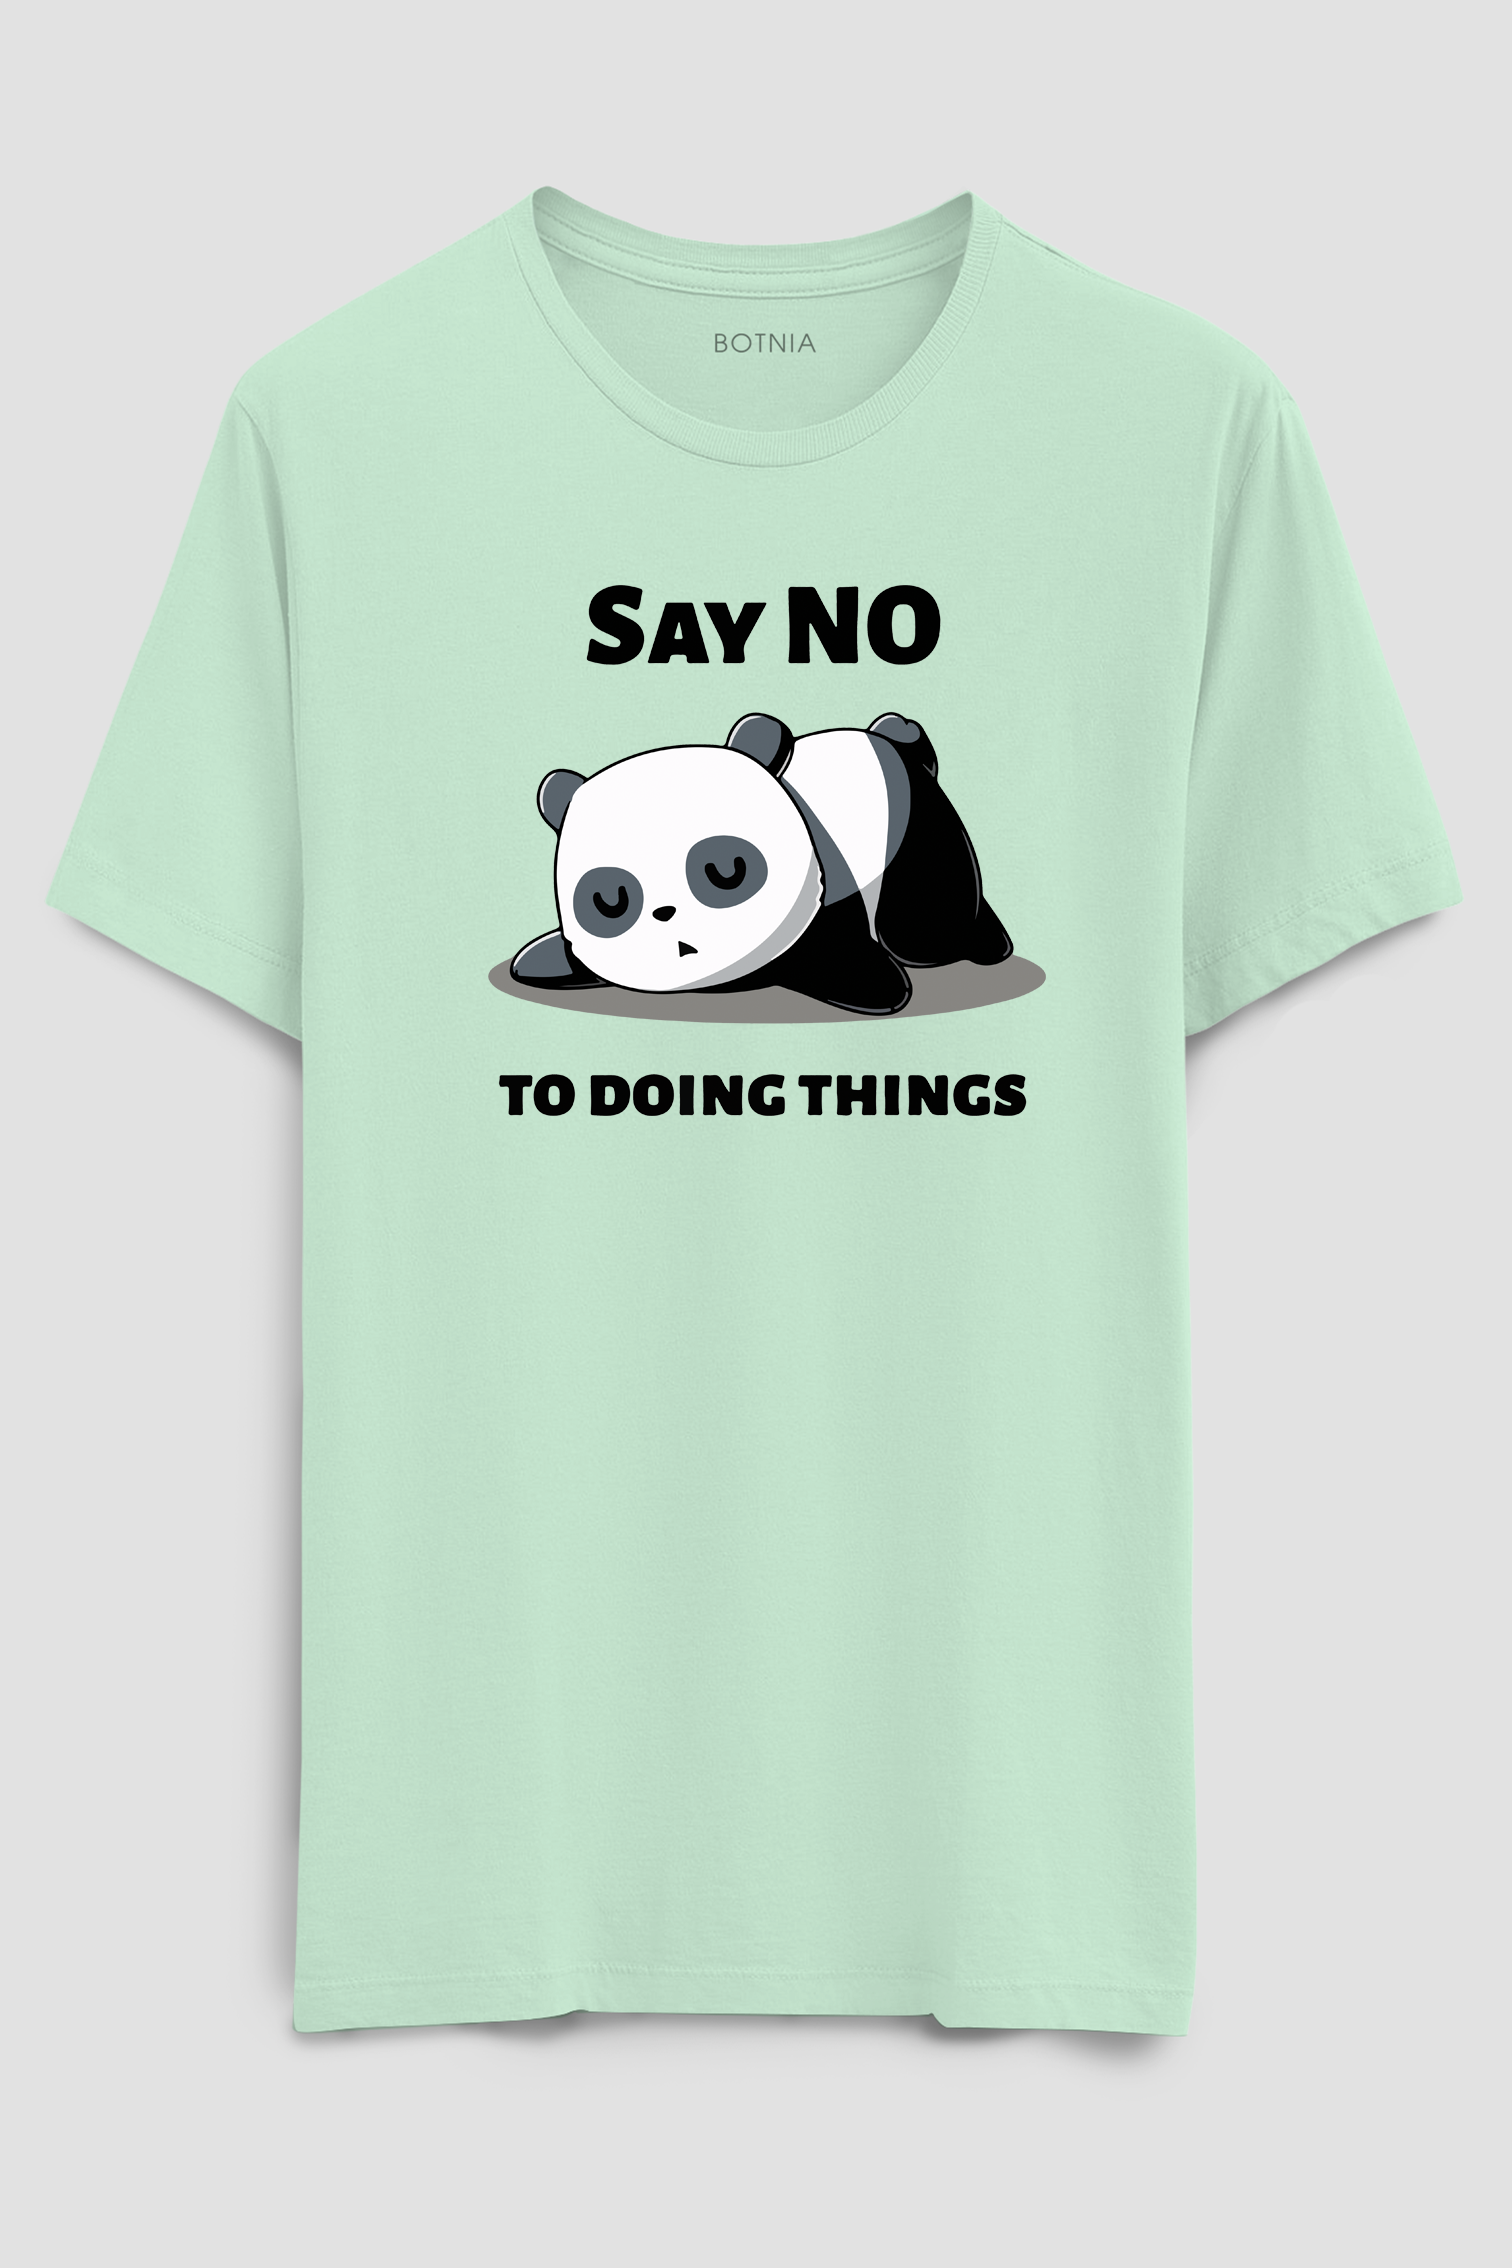 Say No to doing things- Half sleeve t-shirt